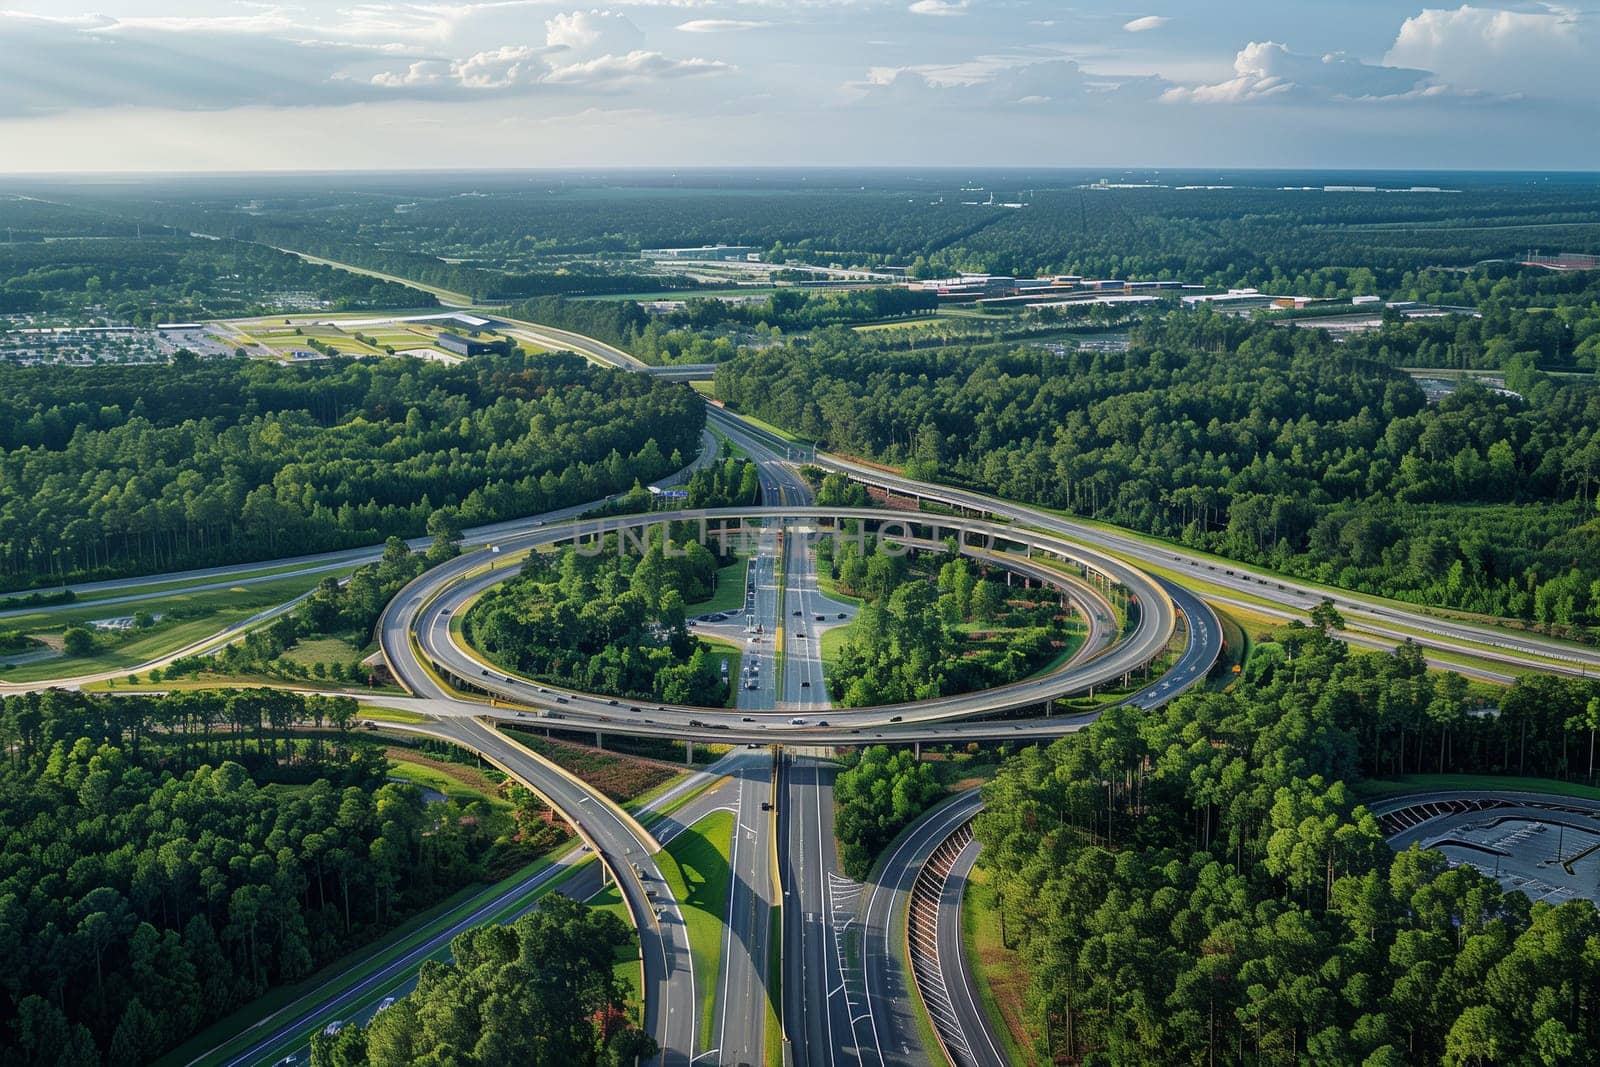 A birds eye view of a complex highway interchange with multiple lanes and ramps, all enclosed by lush green trees.